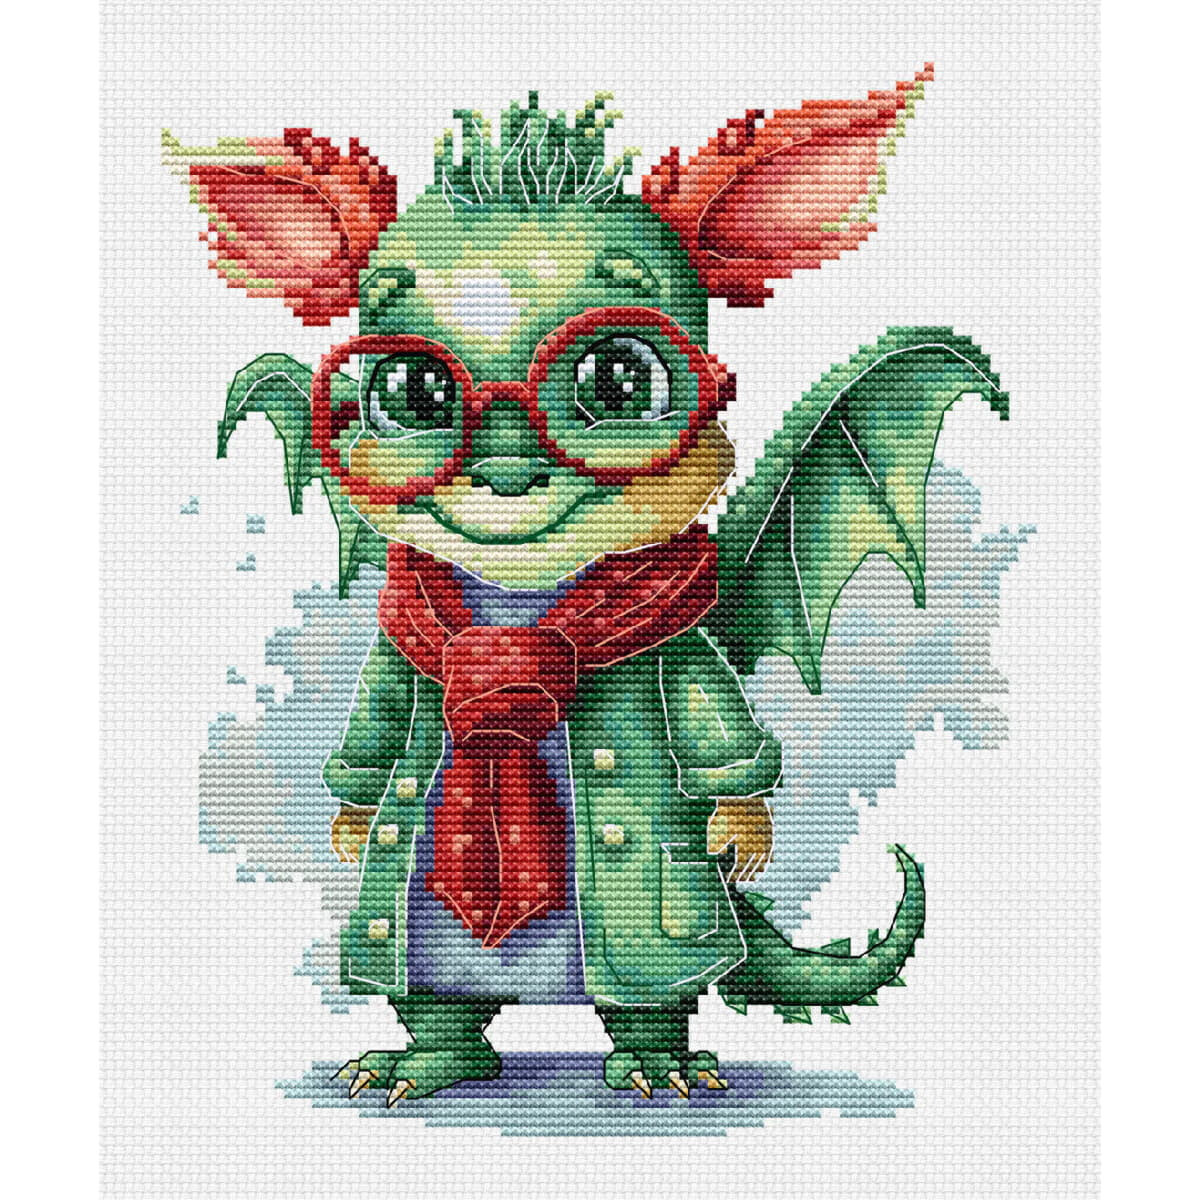 A cute dragon in a green coat and with large, round red...